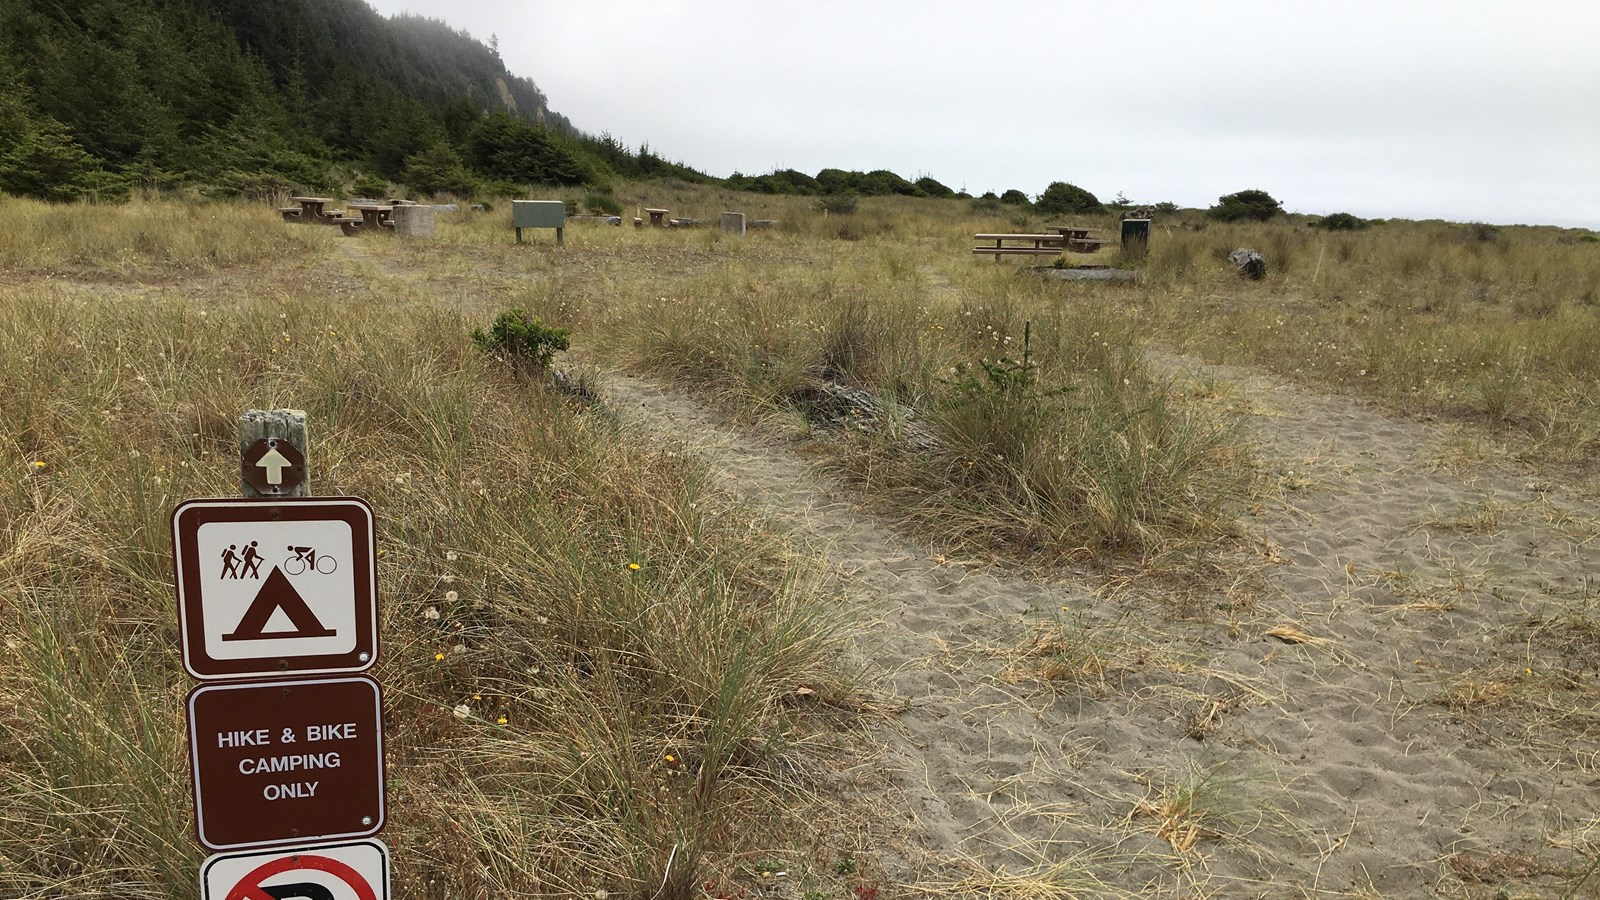 Hike and bike signs, sandy trail and a campsite on grassy dunes.